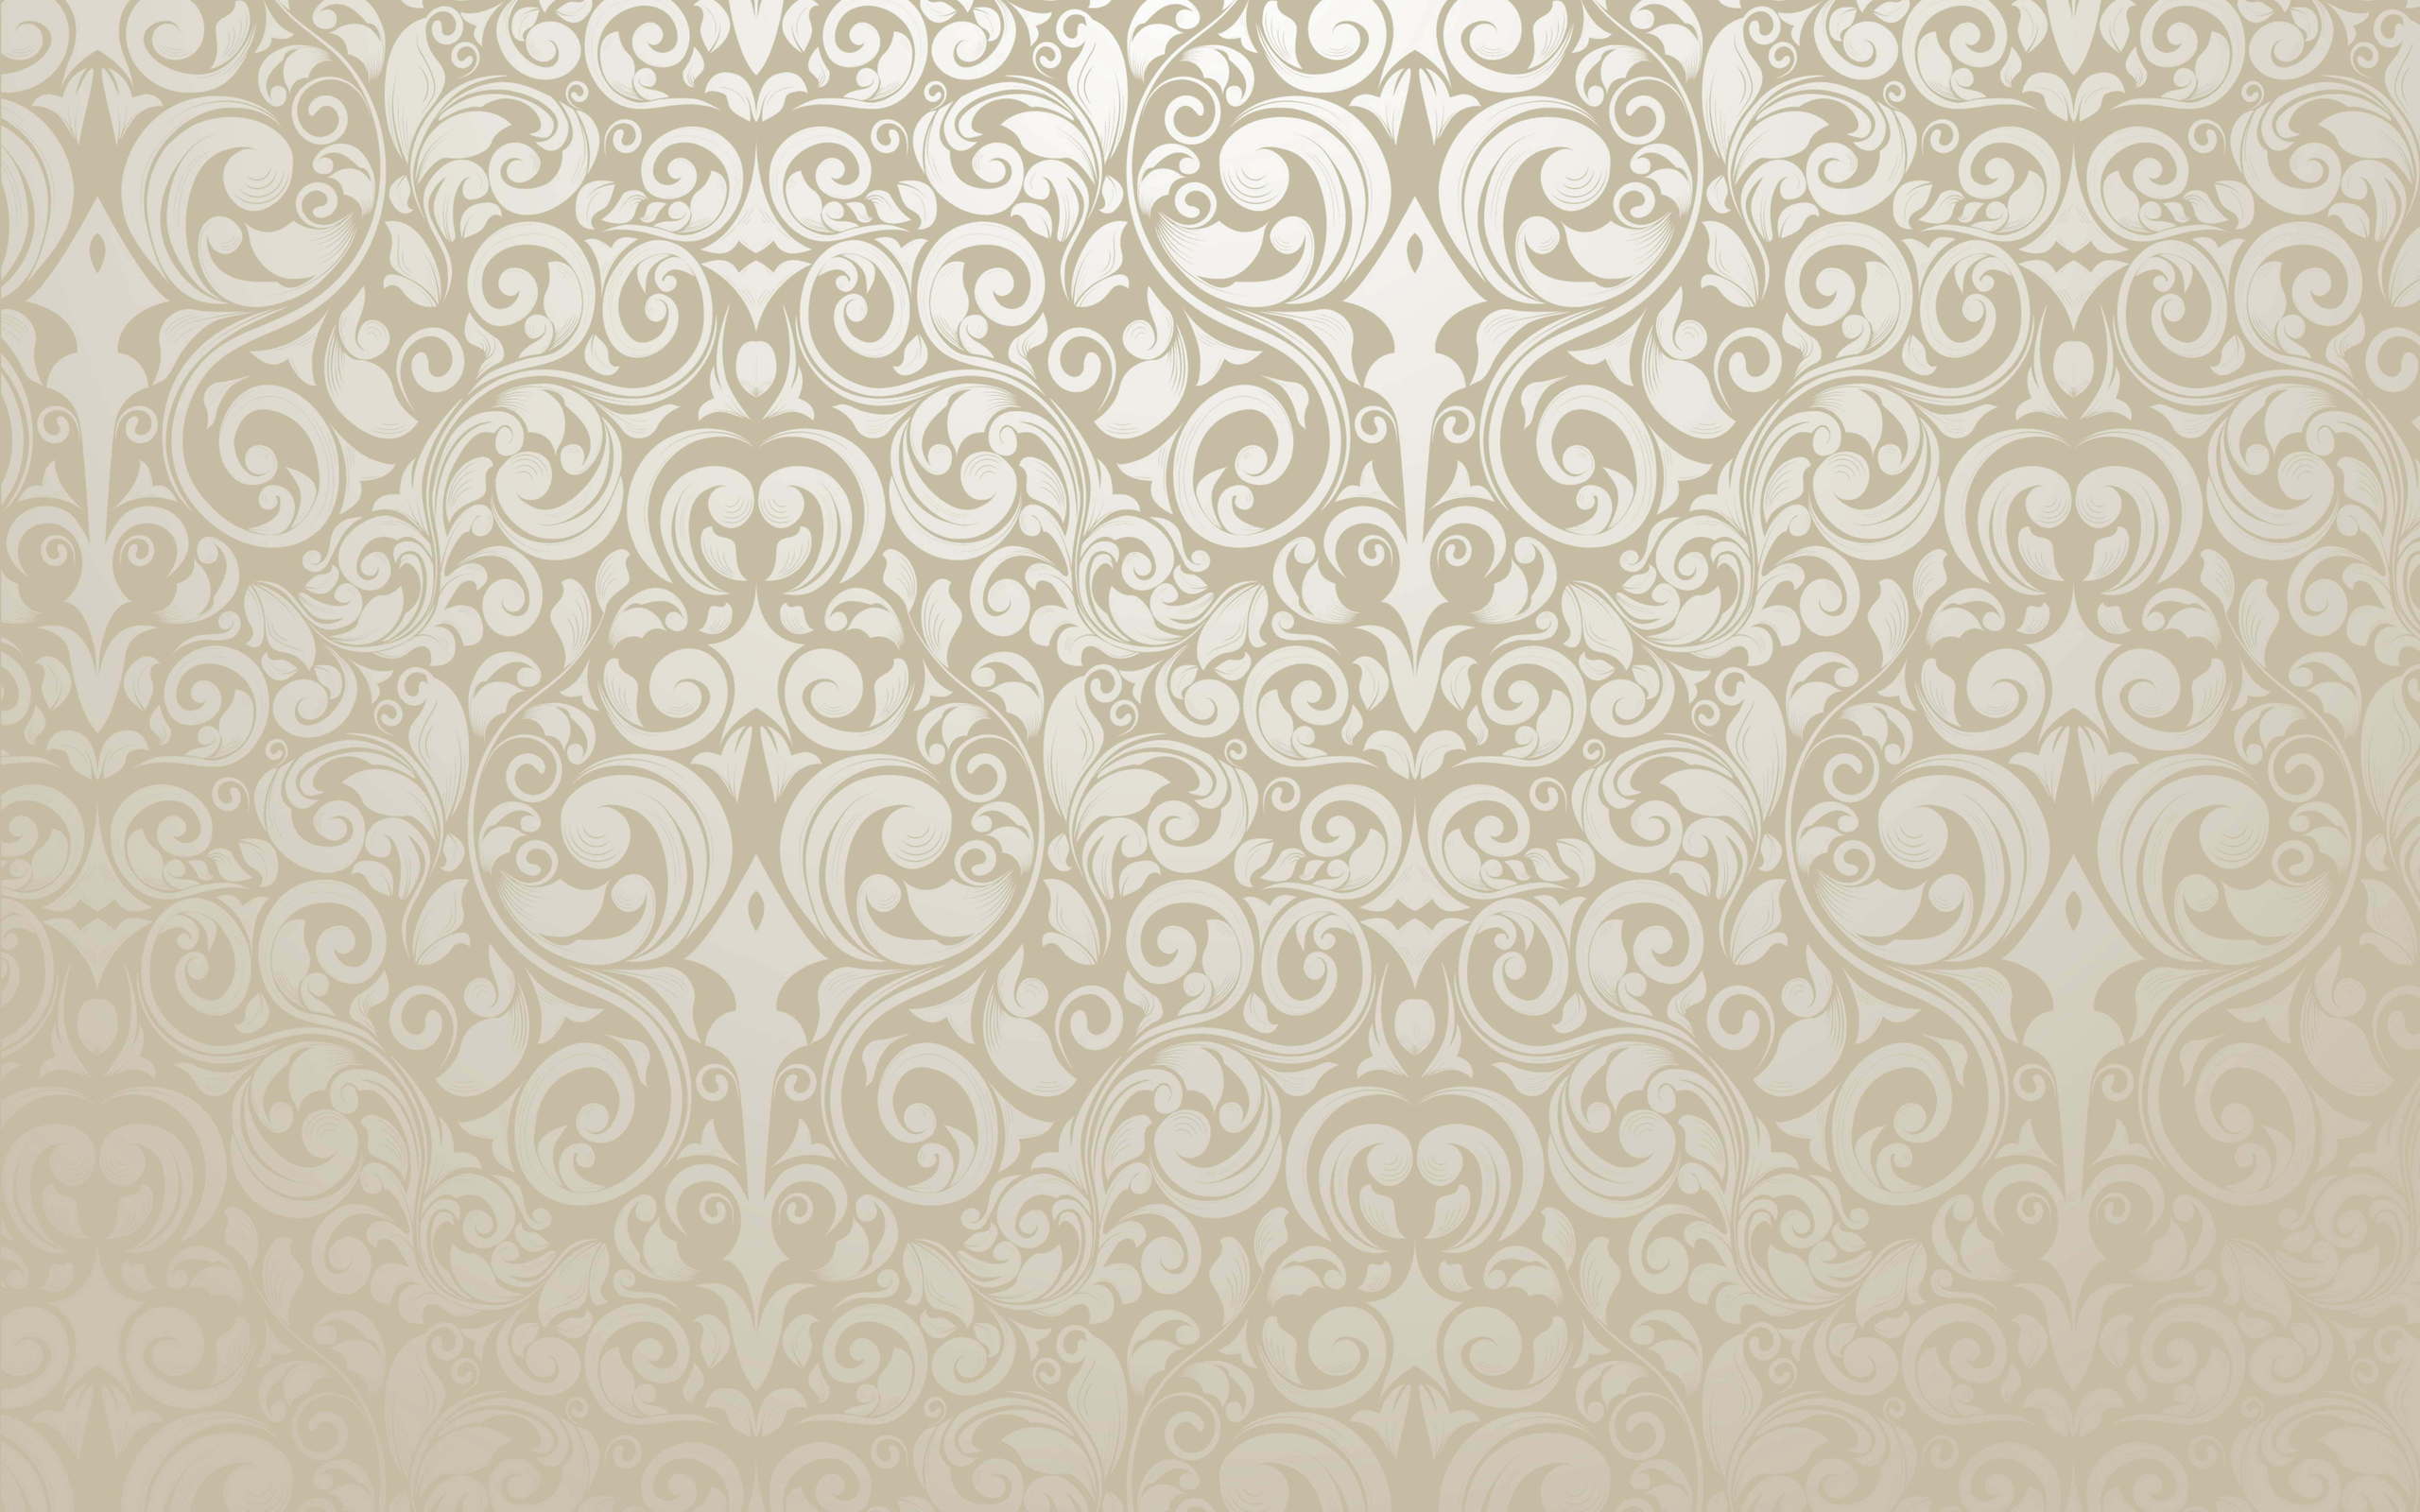 Attachment for Vintage Pattern HD Wallpaper in gold color for card